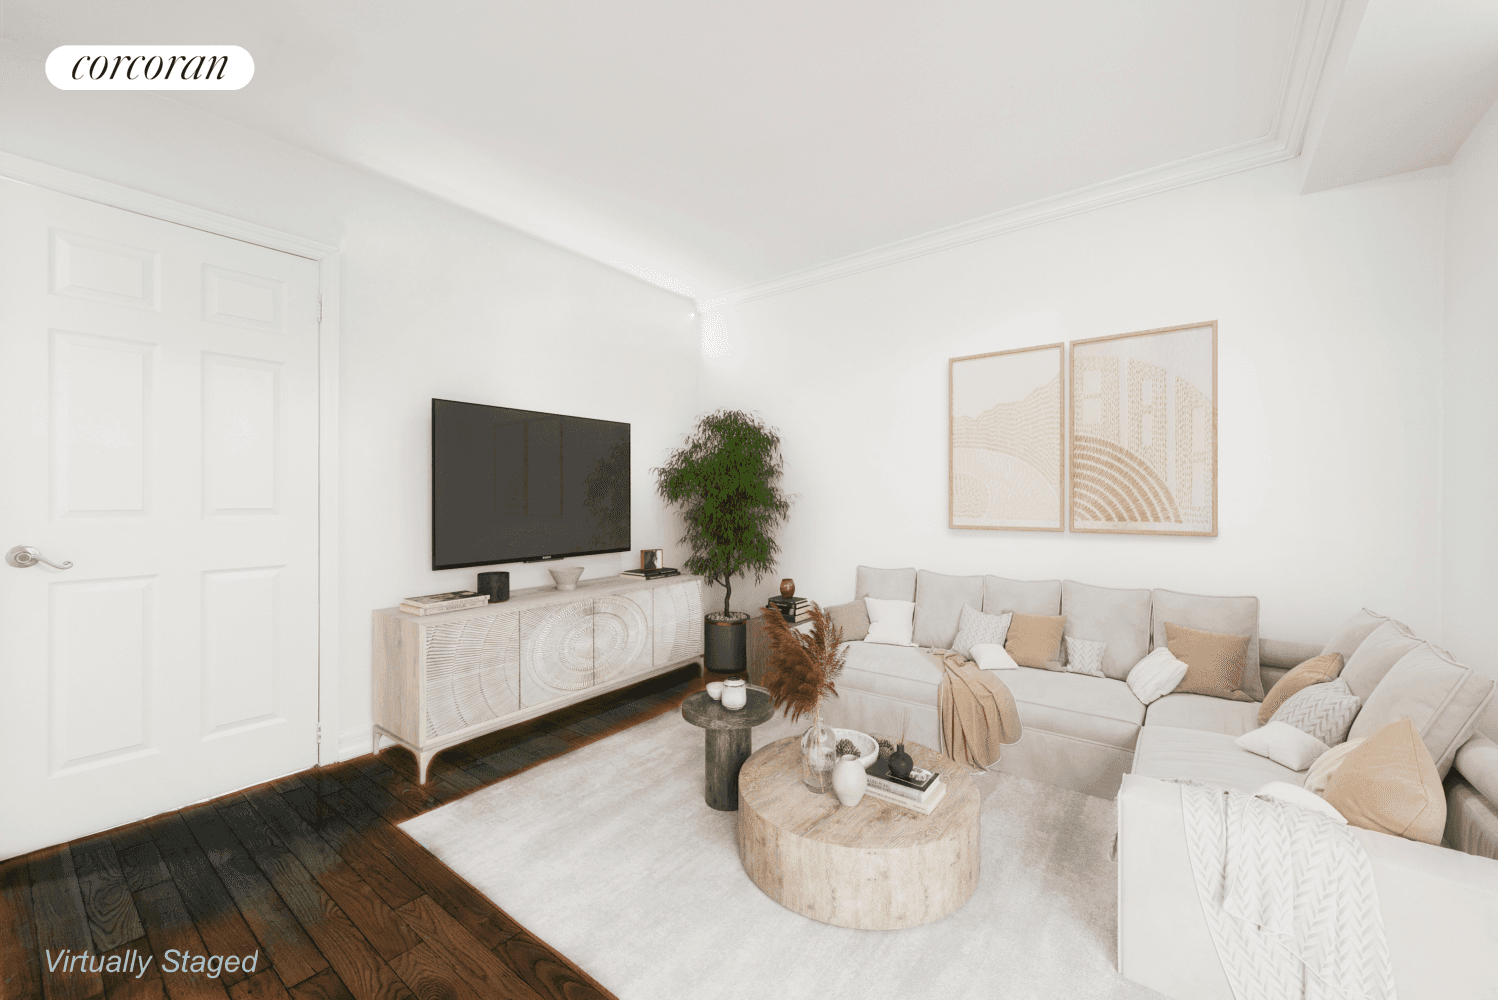 401 West 56th St, Apartment, 5P is a spacious and light 2 bedroom apartment just blocks away from Central Park and Columbus Circle.